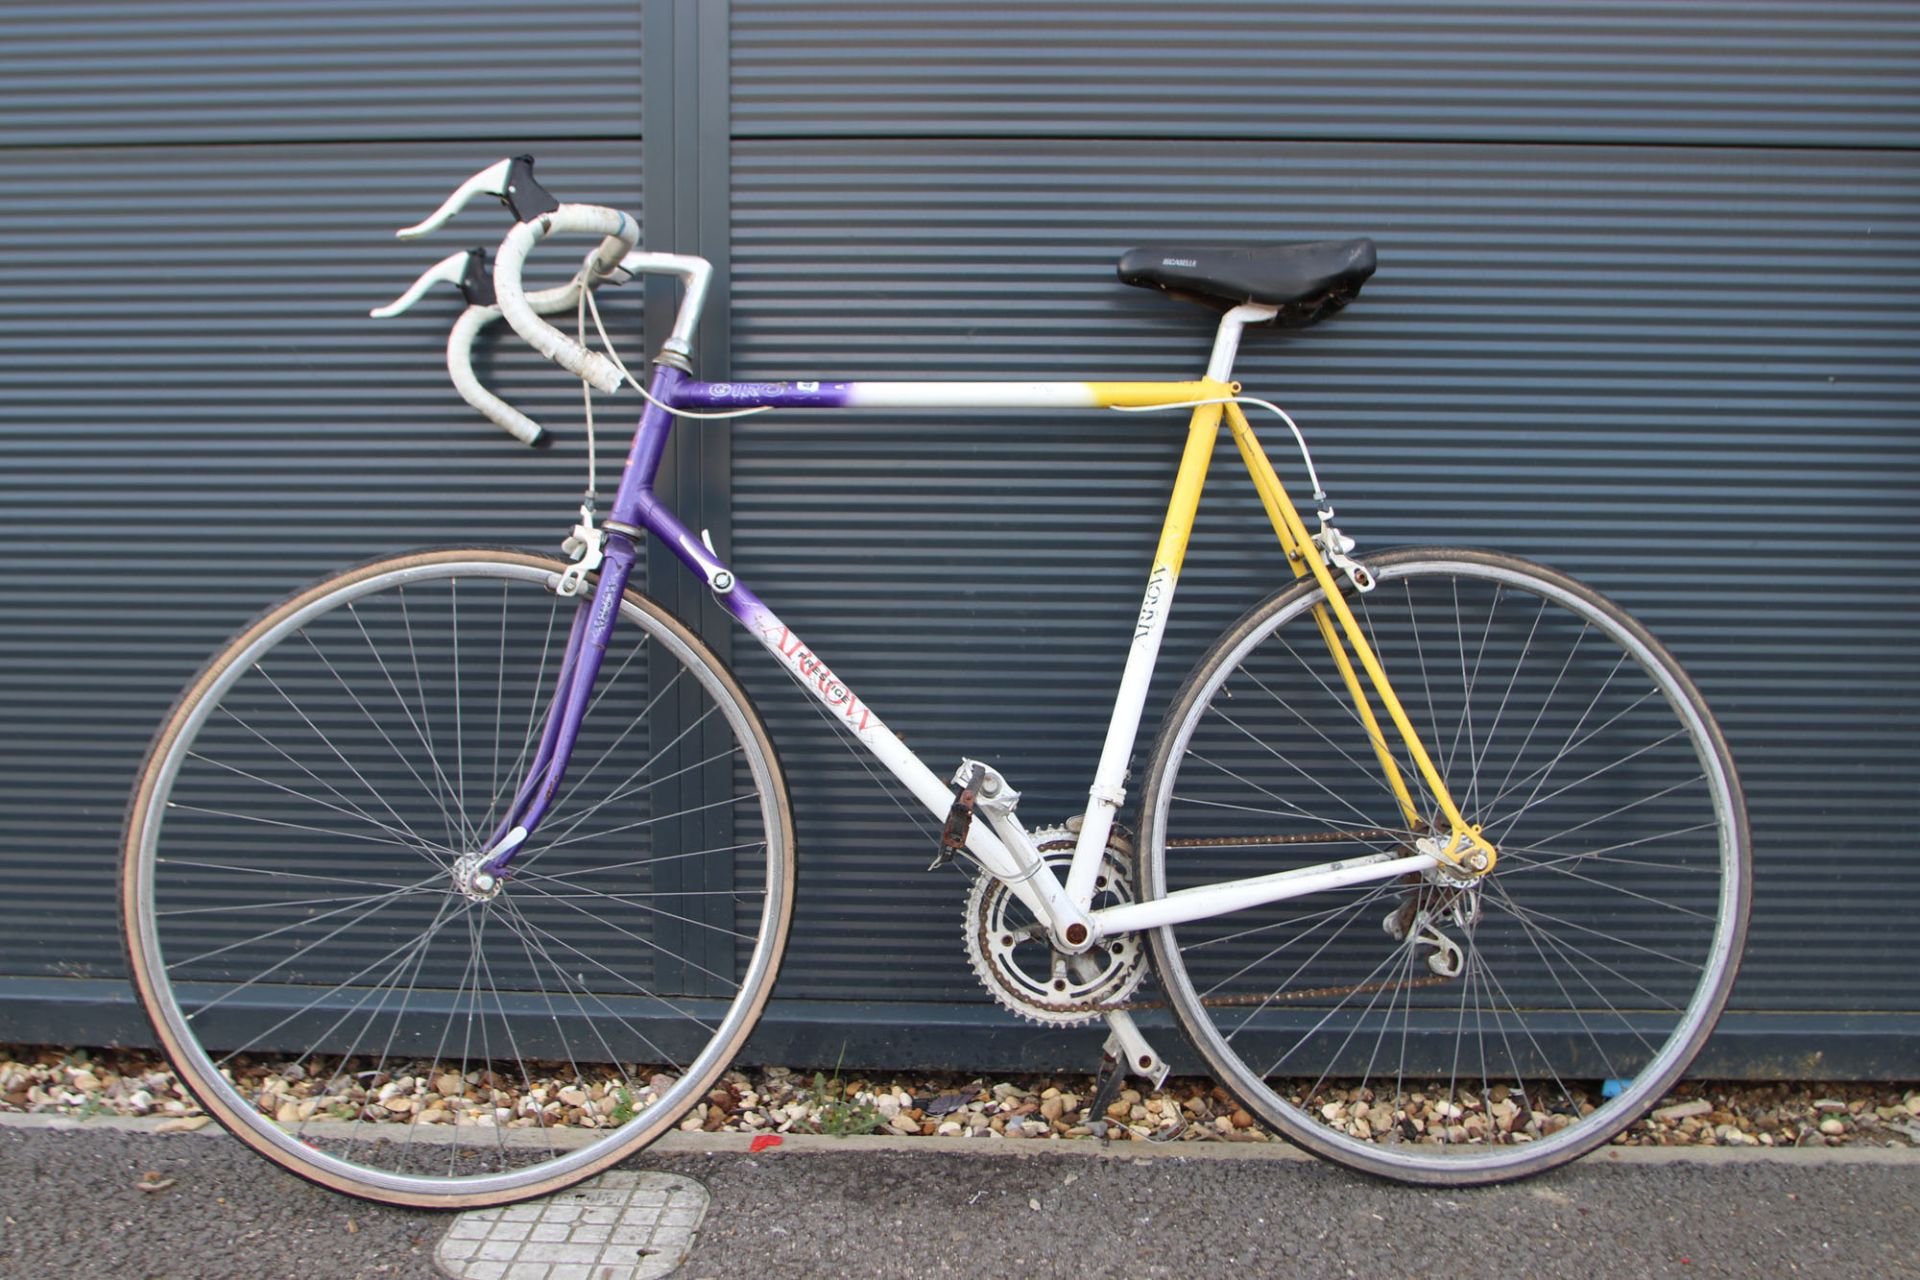 Purple, white and yellow racing cycle